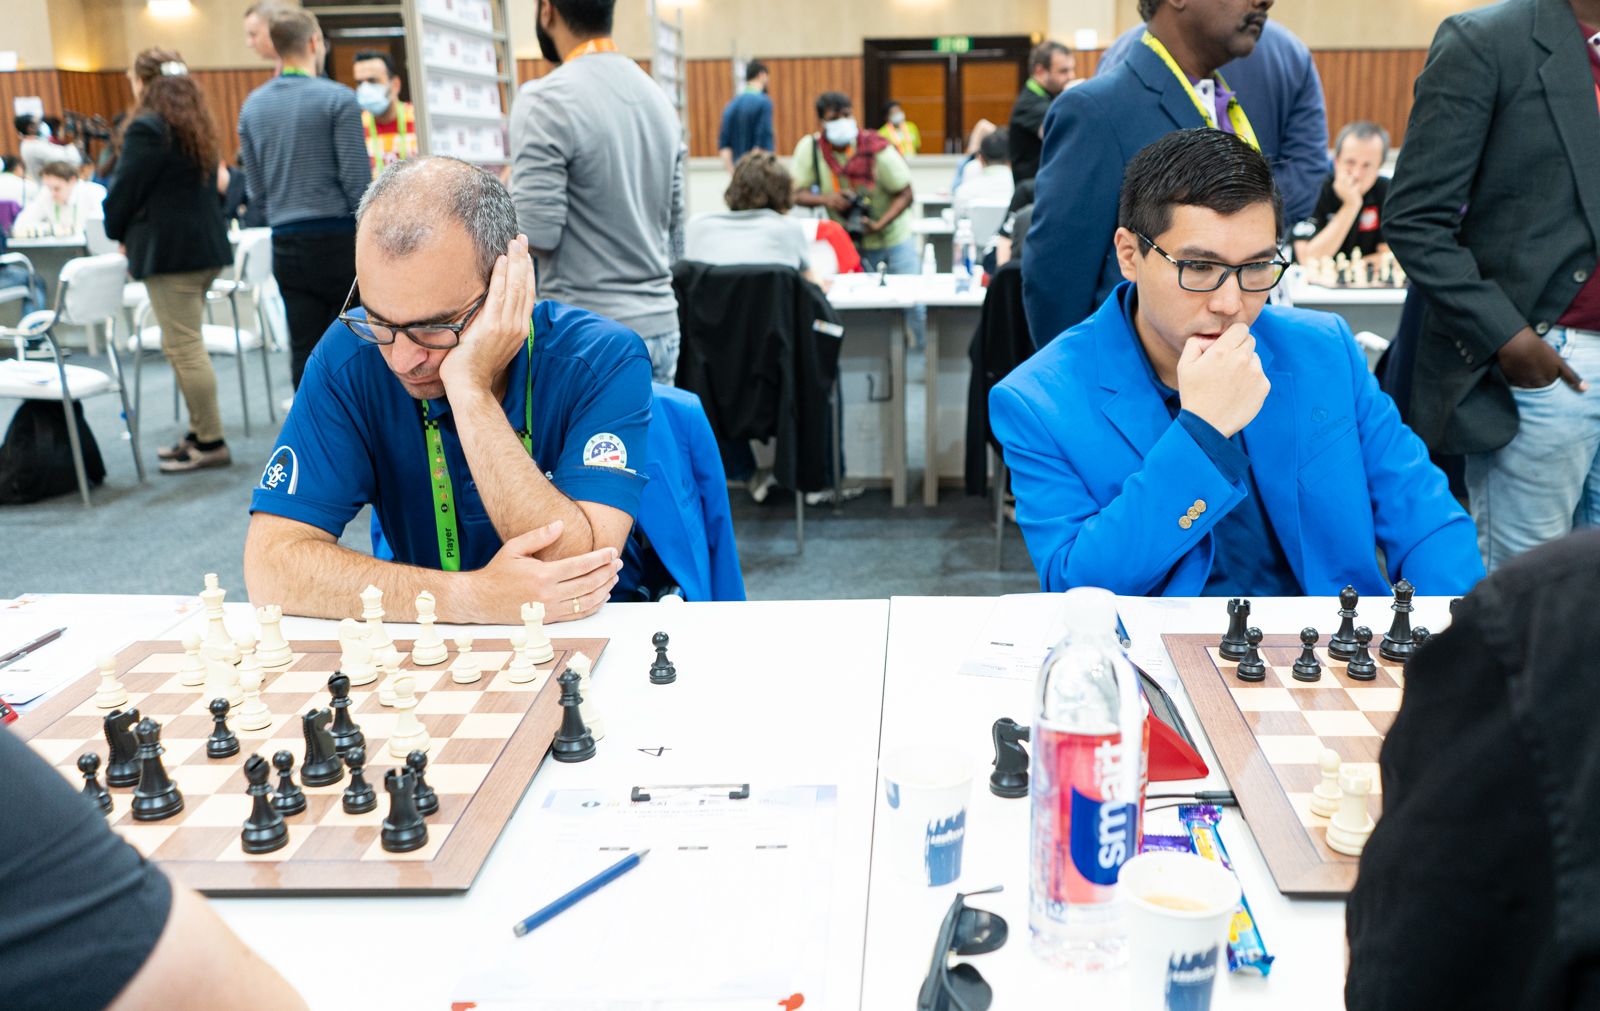 Results – Chess Olympiad 2022 round 5 (open section) – Chessdom